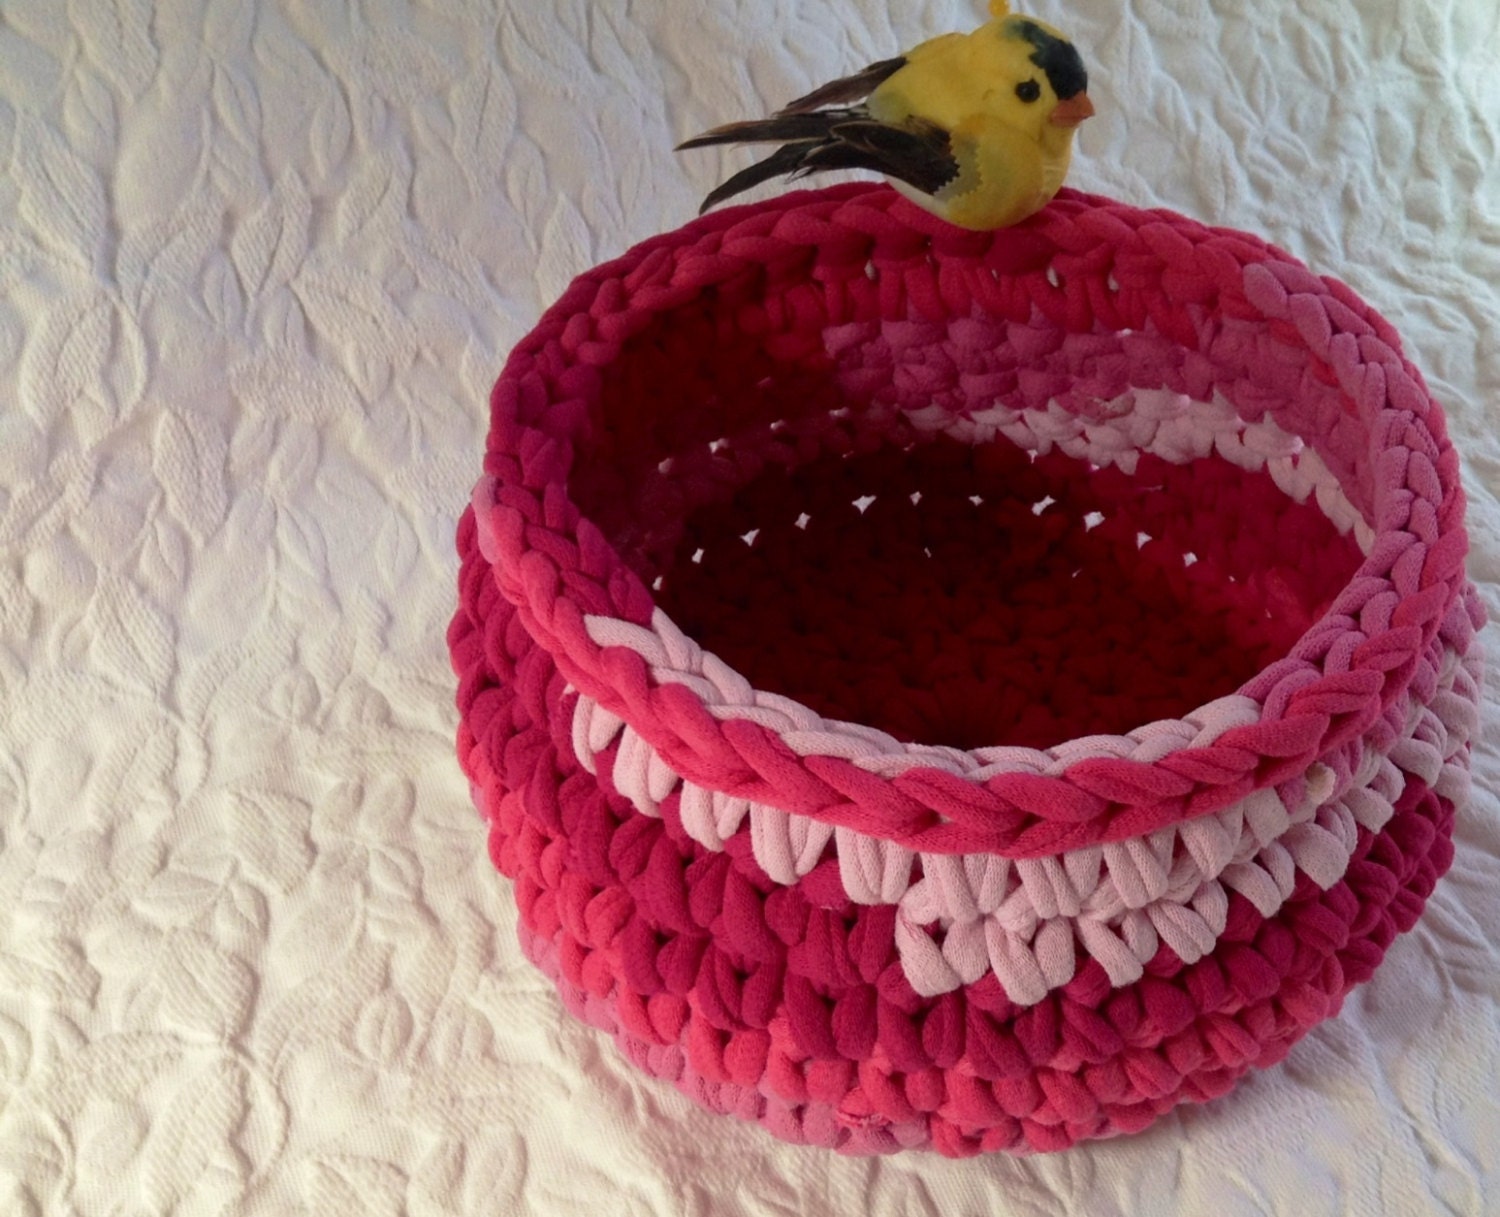 Pink cotton crocheted baskets created from recycled t shirts